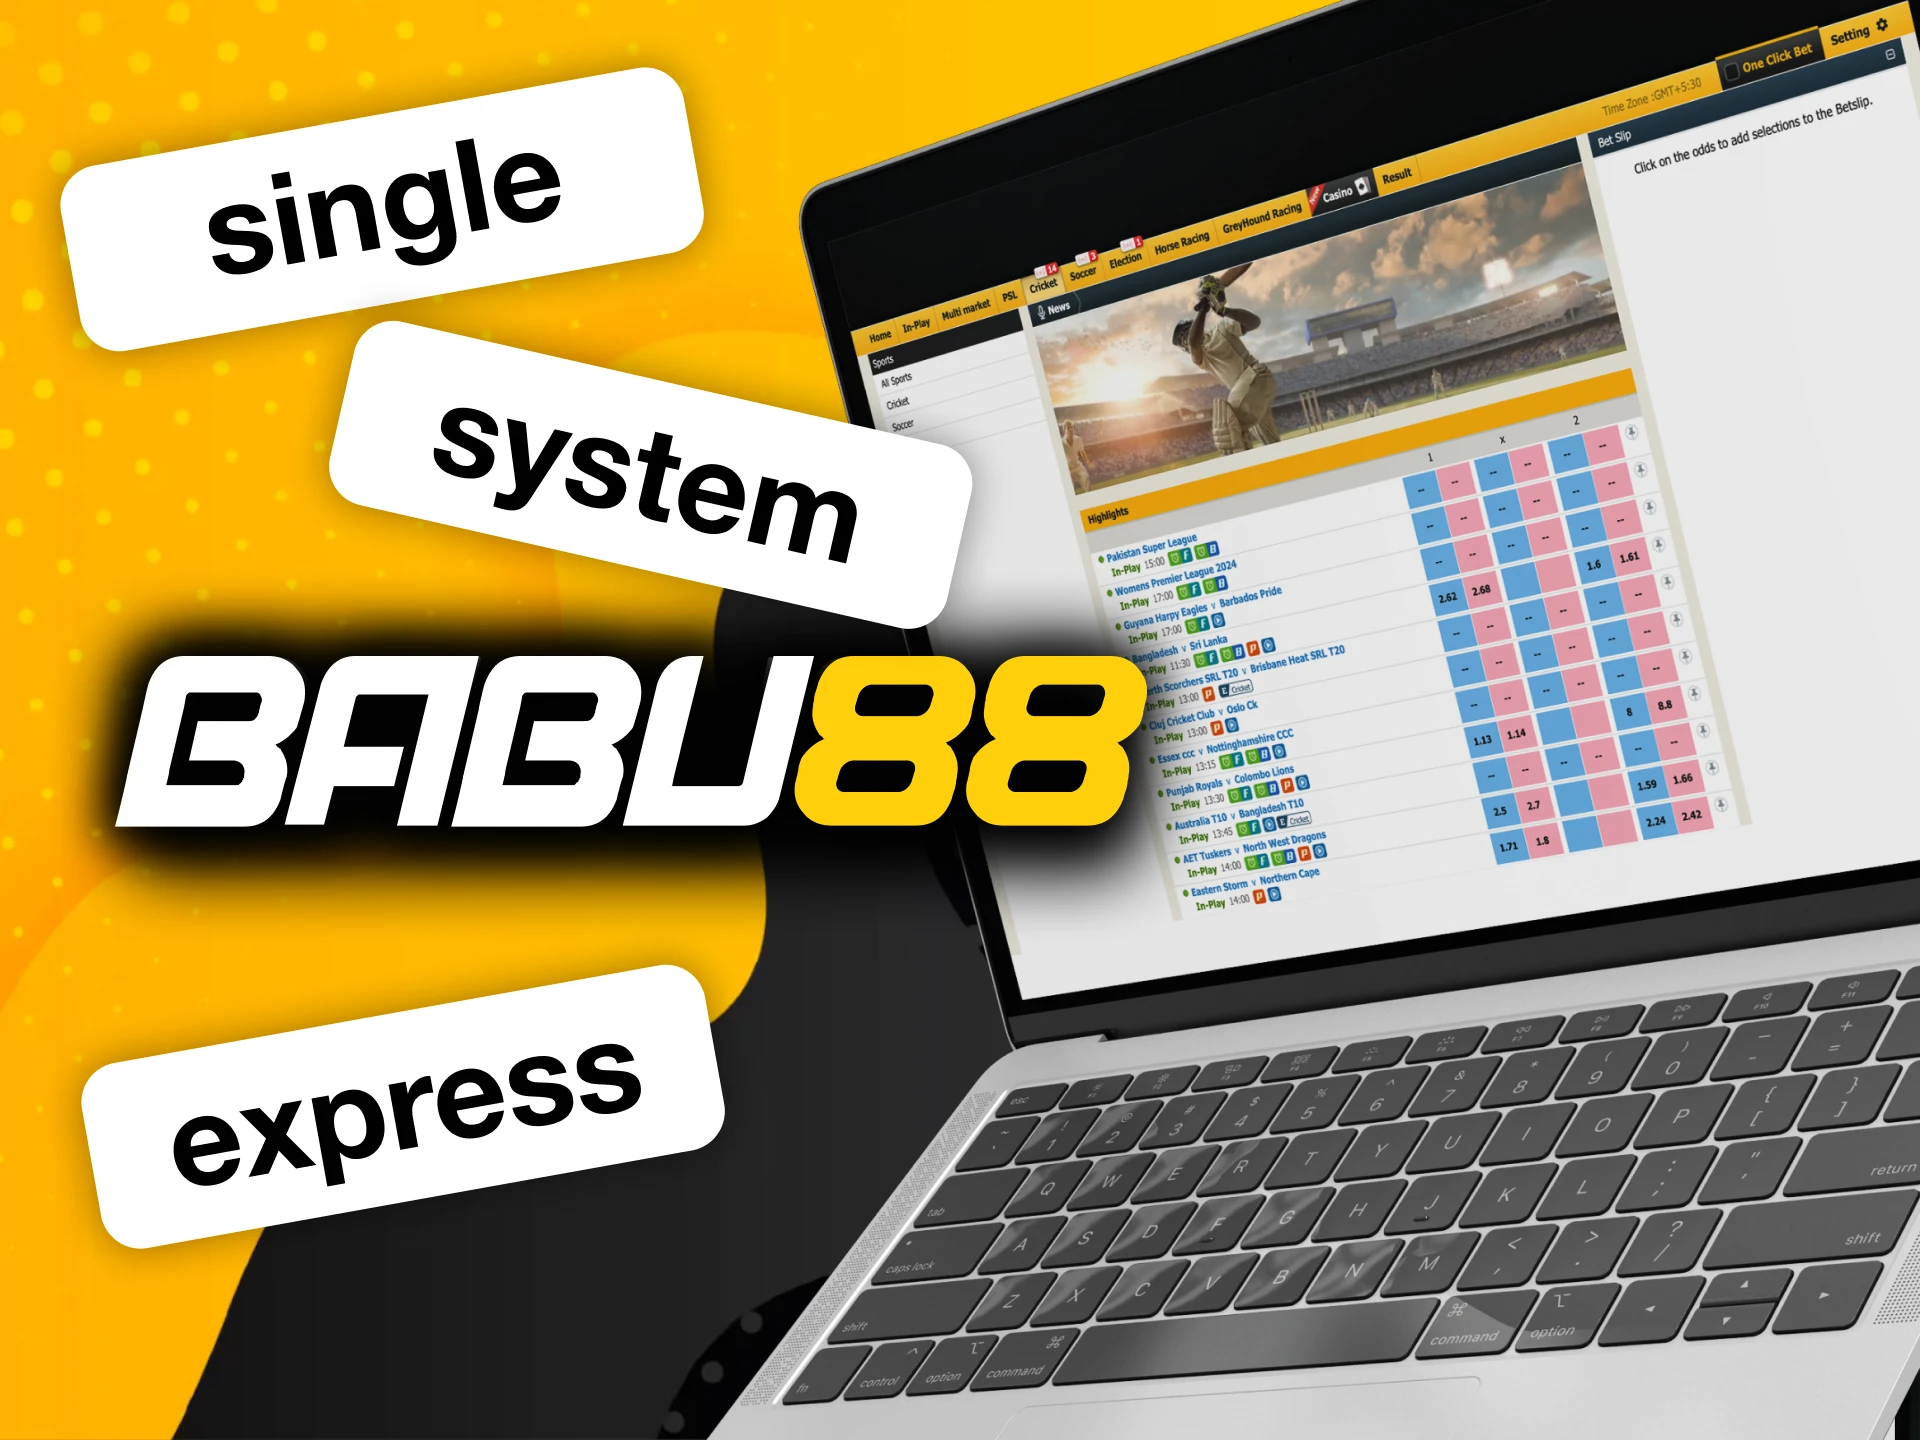 What betting options does Babu88 online casino offer for IPL.